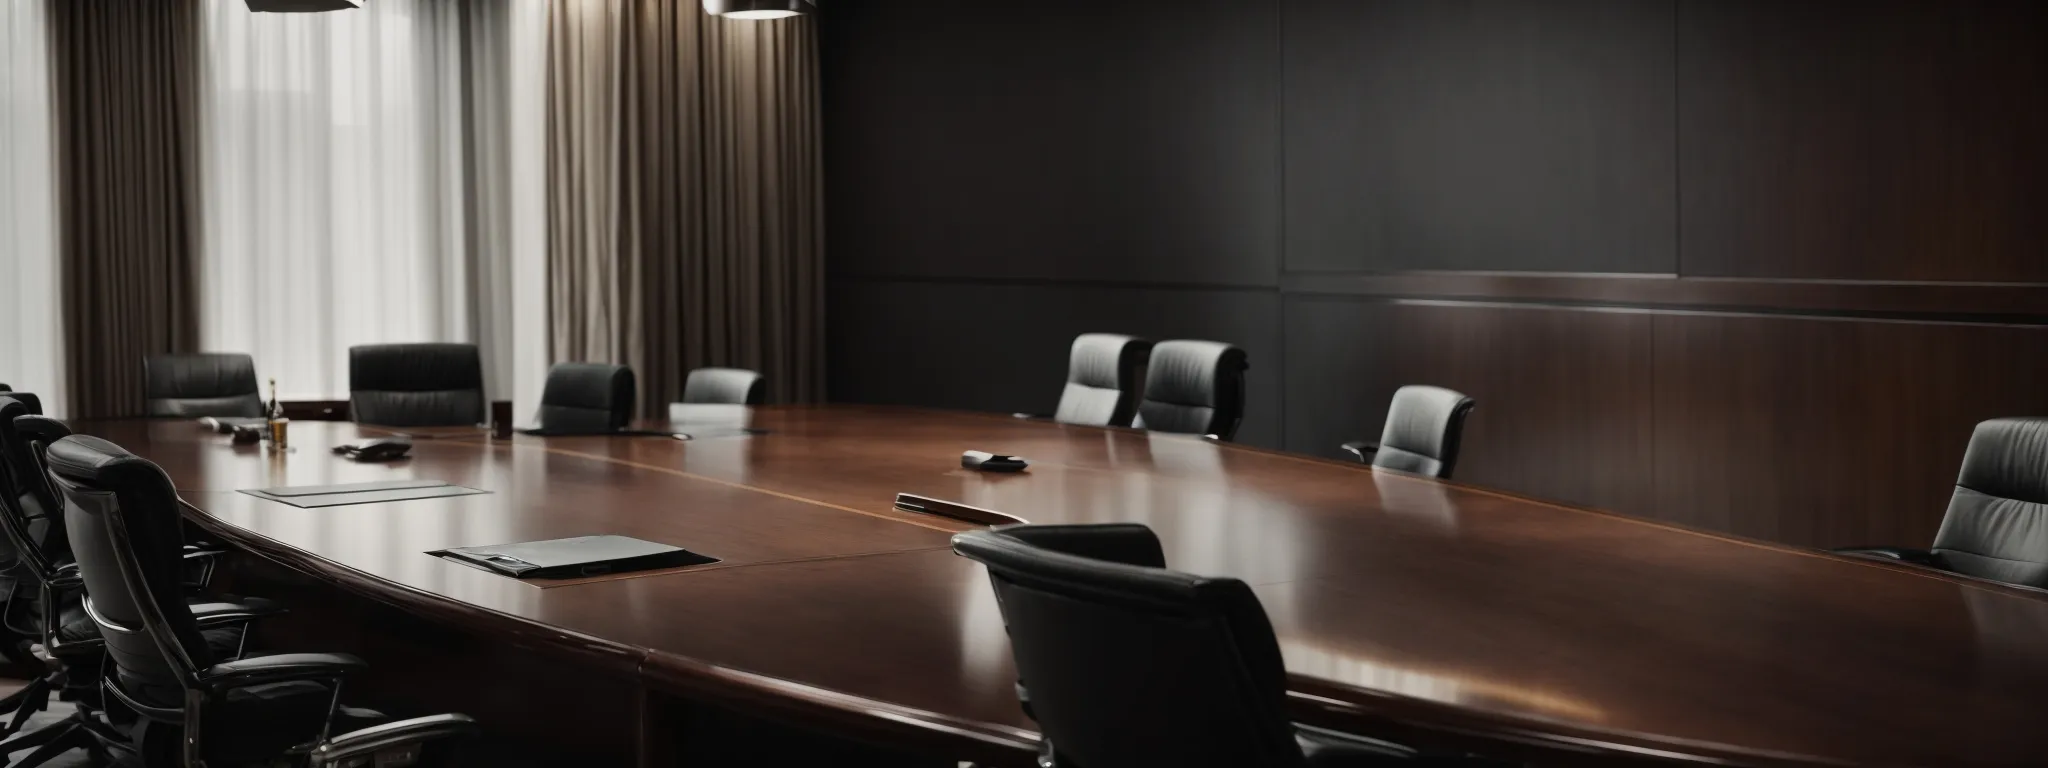 A Boardroom Table Set For Strategy Discussion With Rival Companies' Portfolios Open For Analysis.